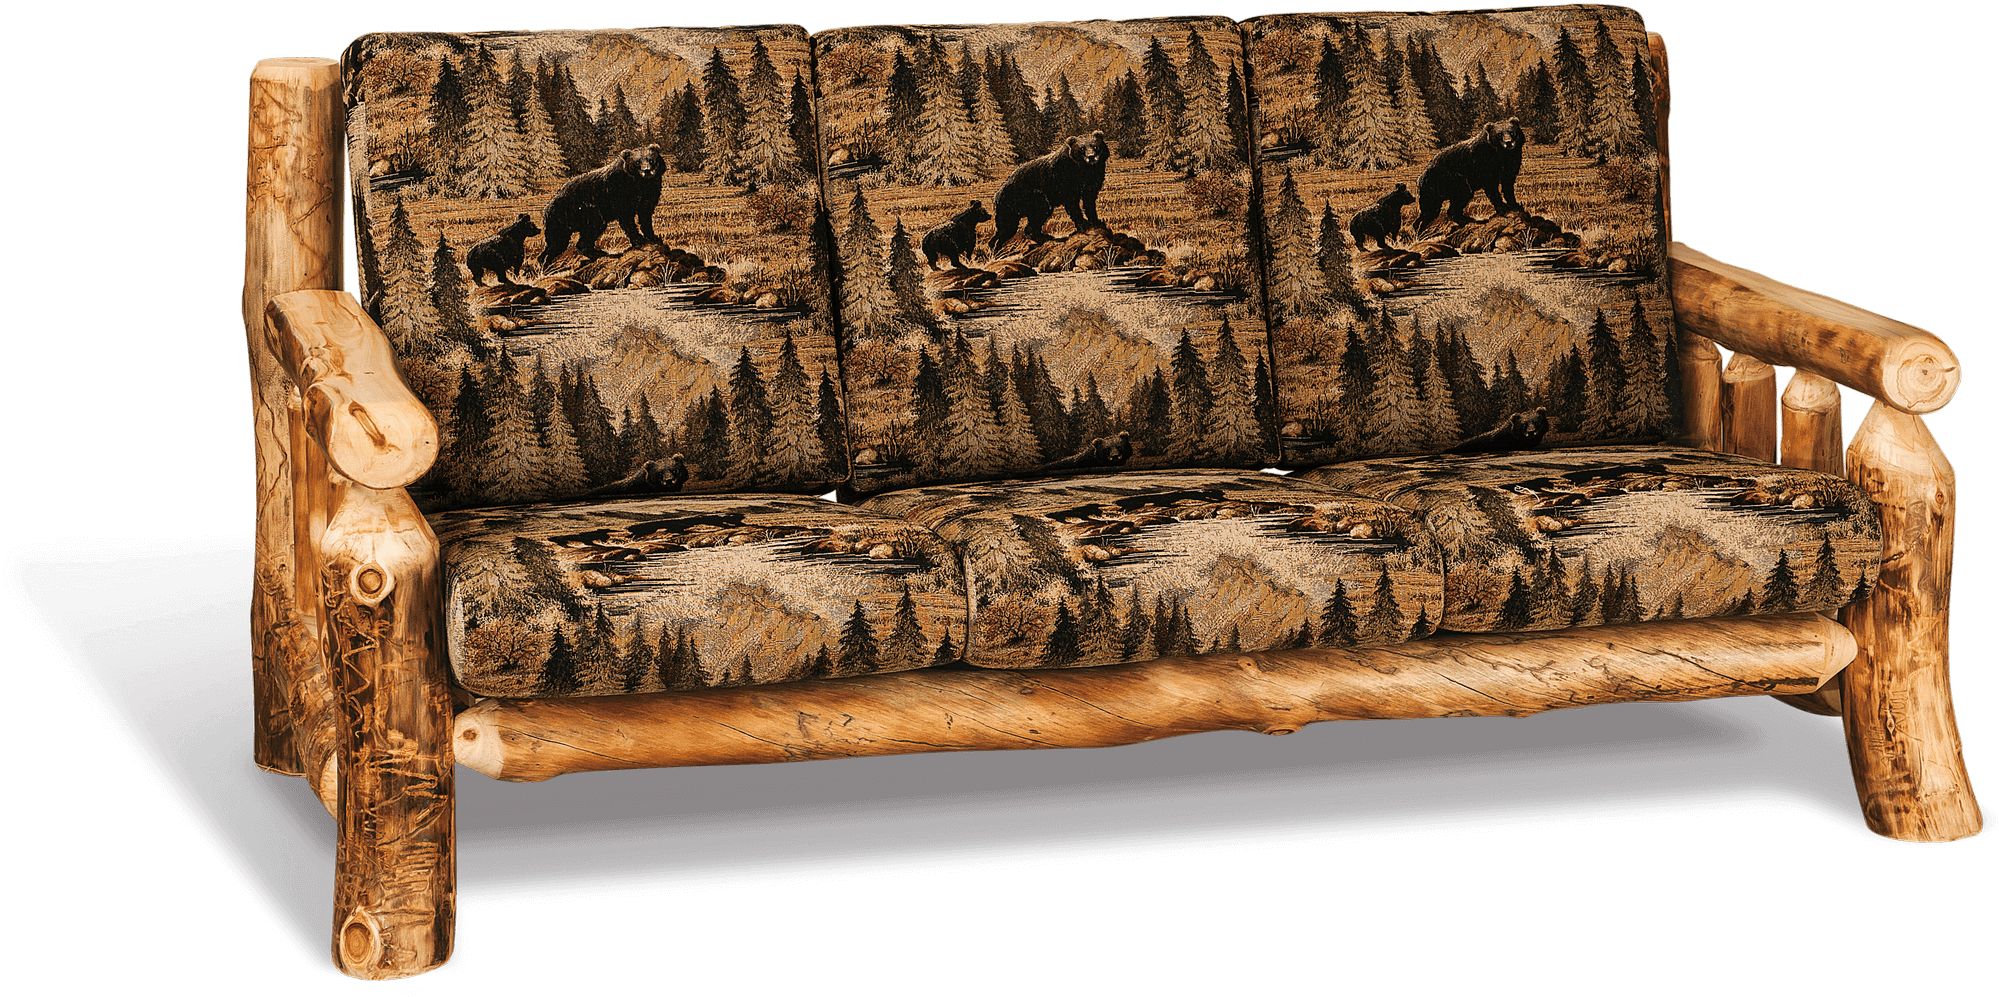 Rustic Wooden Couchwith Bear Print